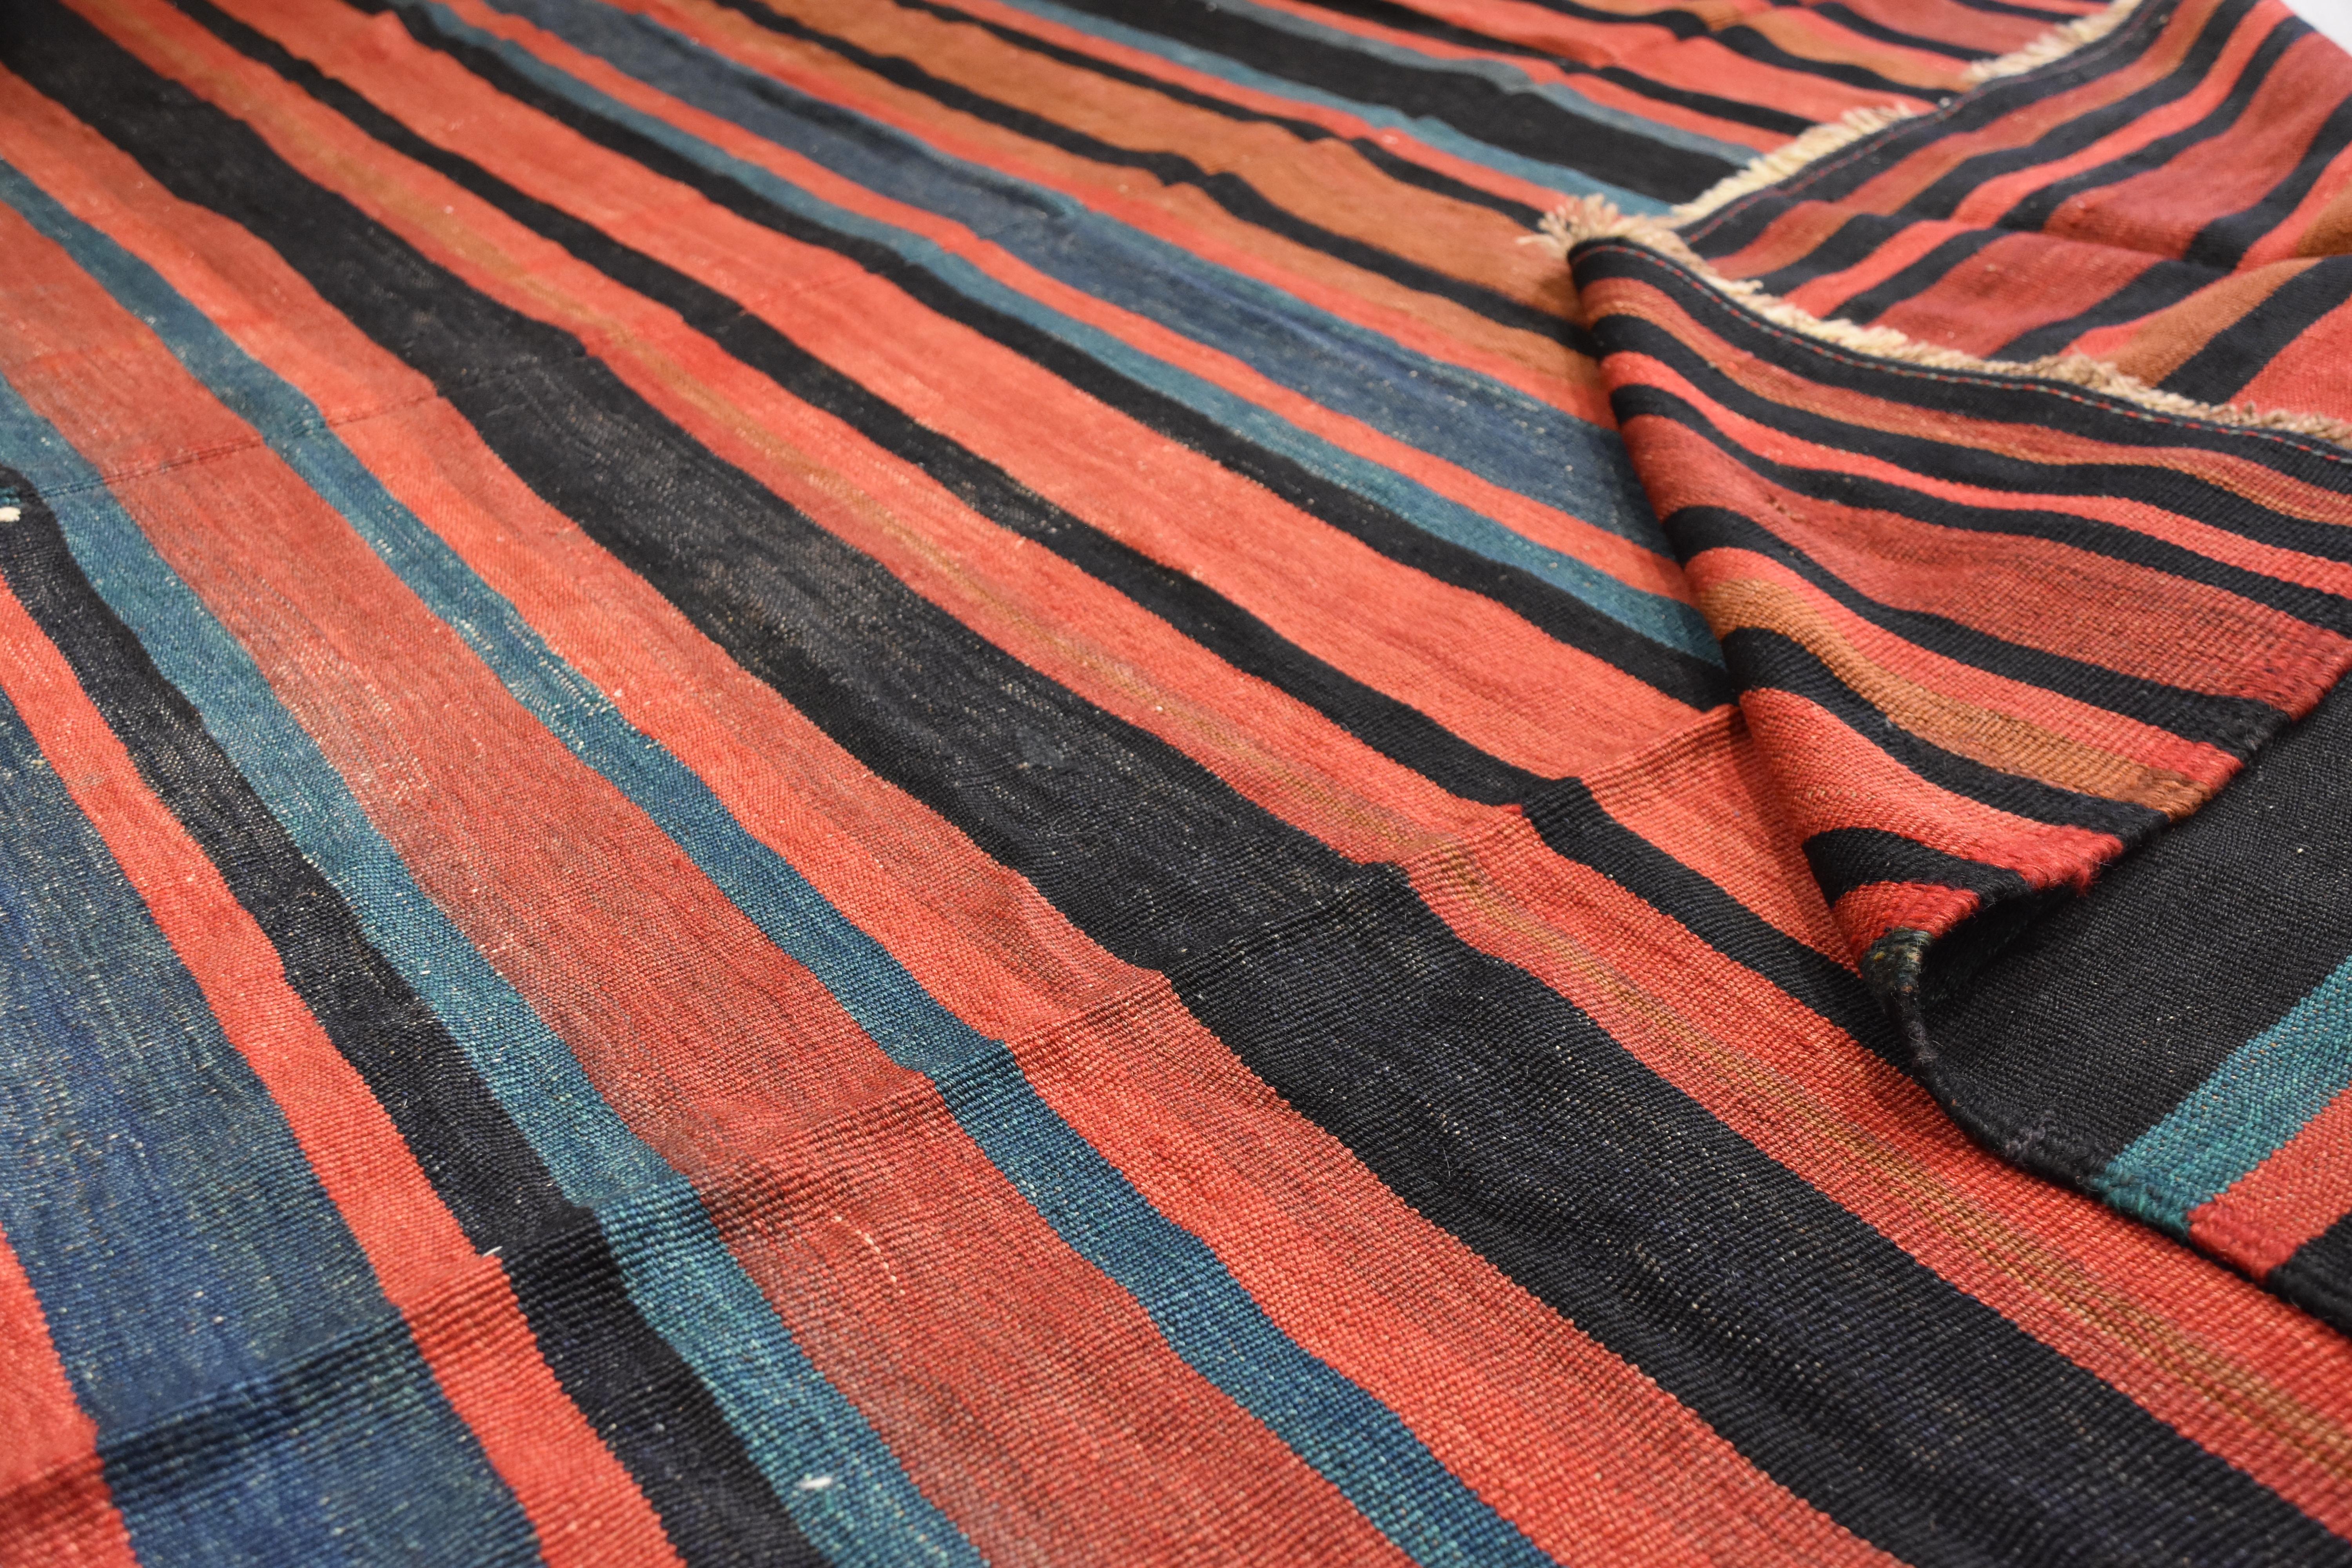 21st Century Red and Blue Nomadic Kurdish Stripes Kilim Rug in Wool, circa 1900s For Sale 2